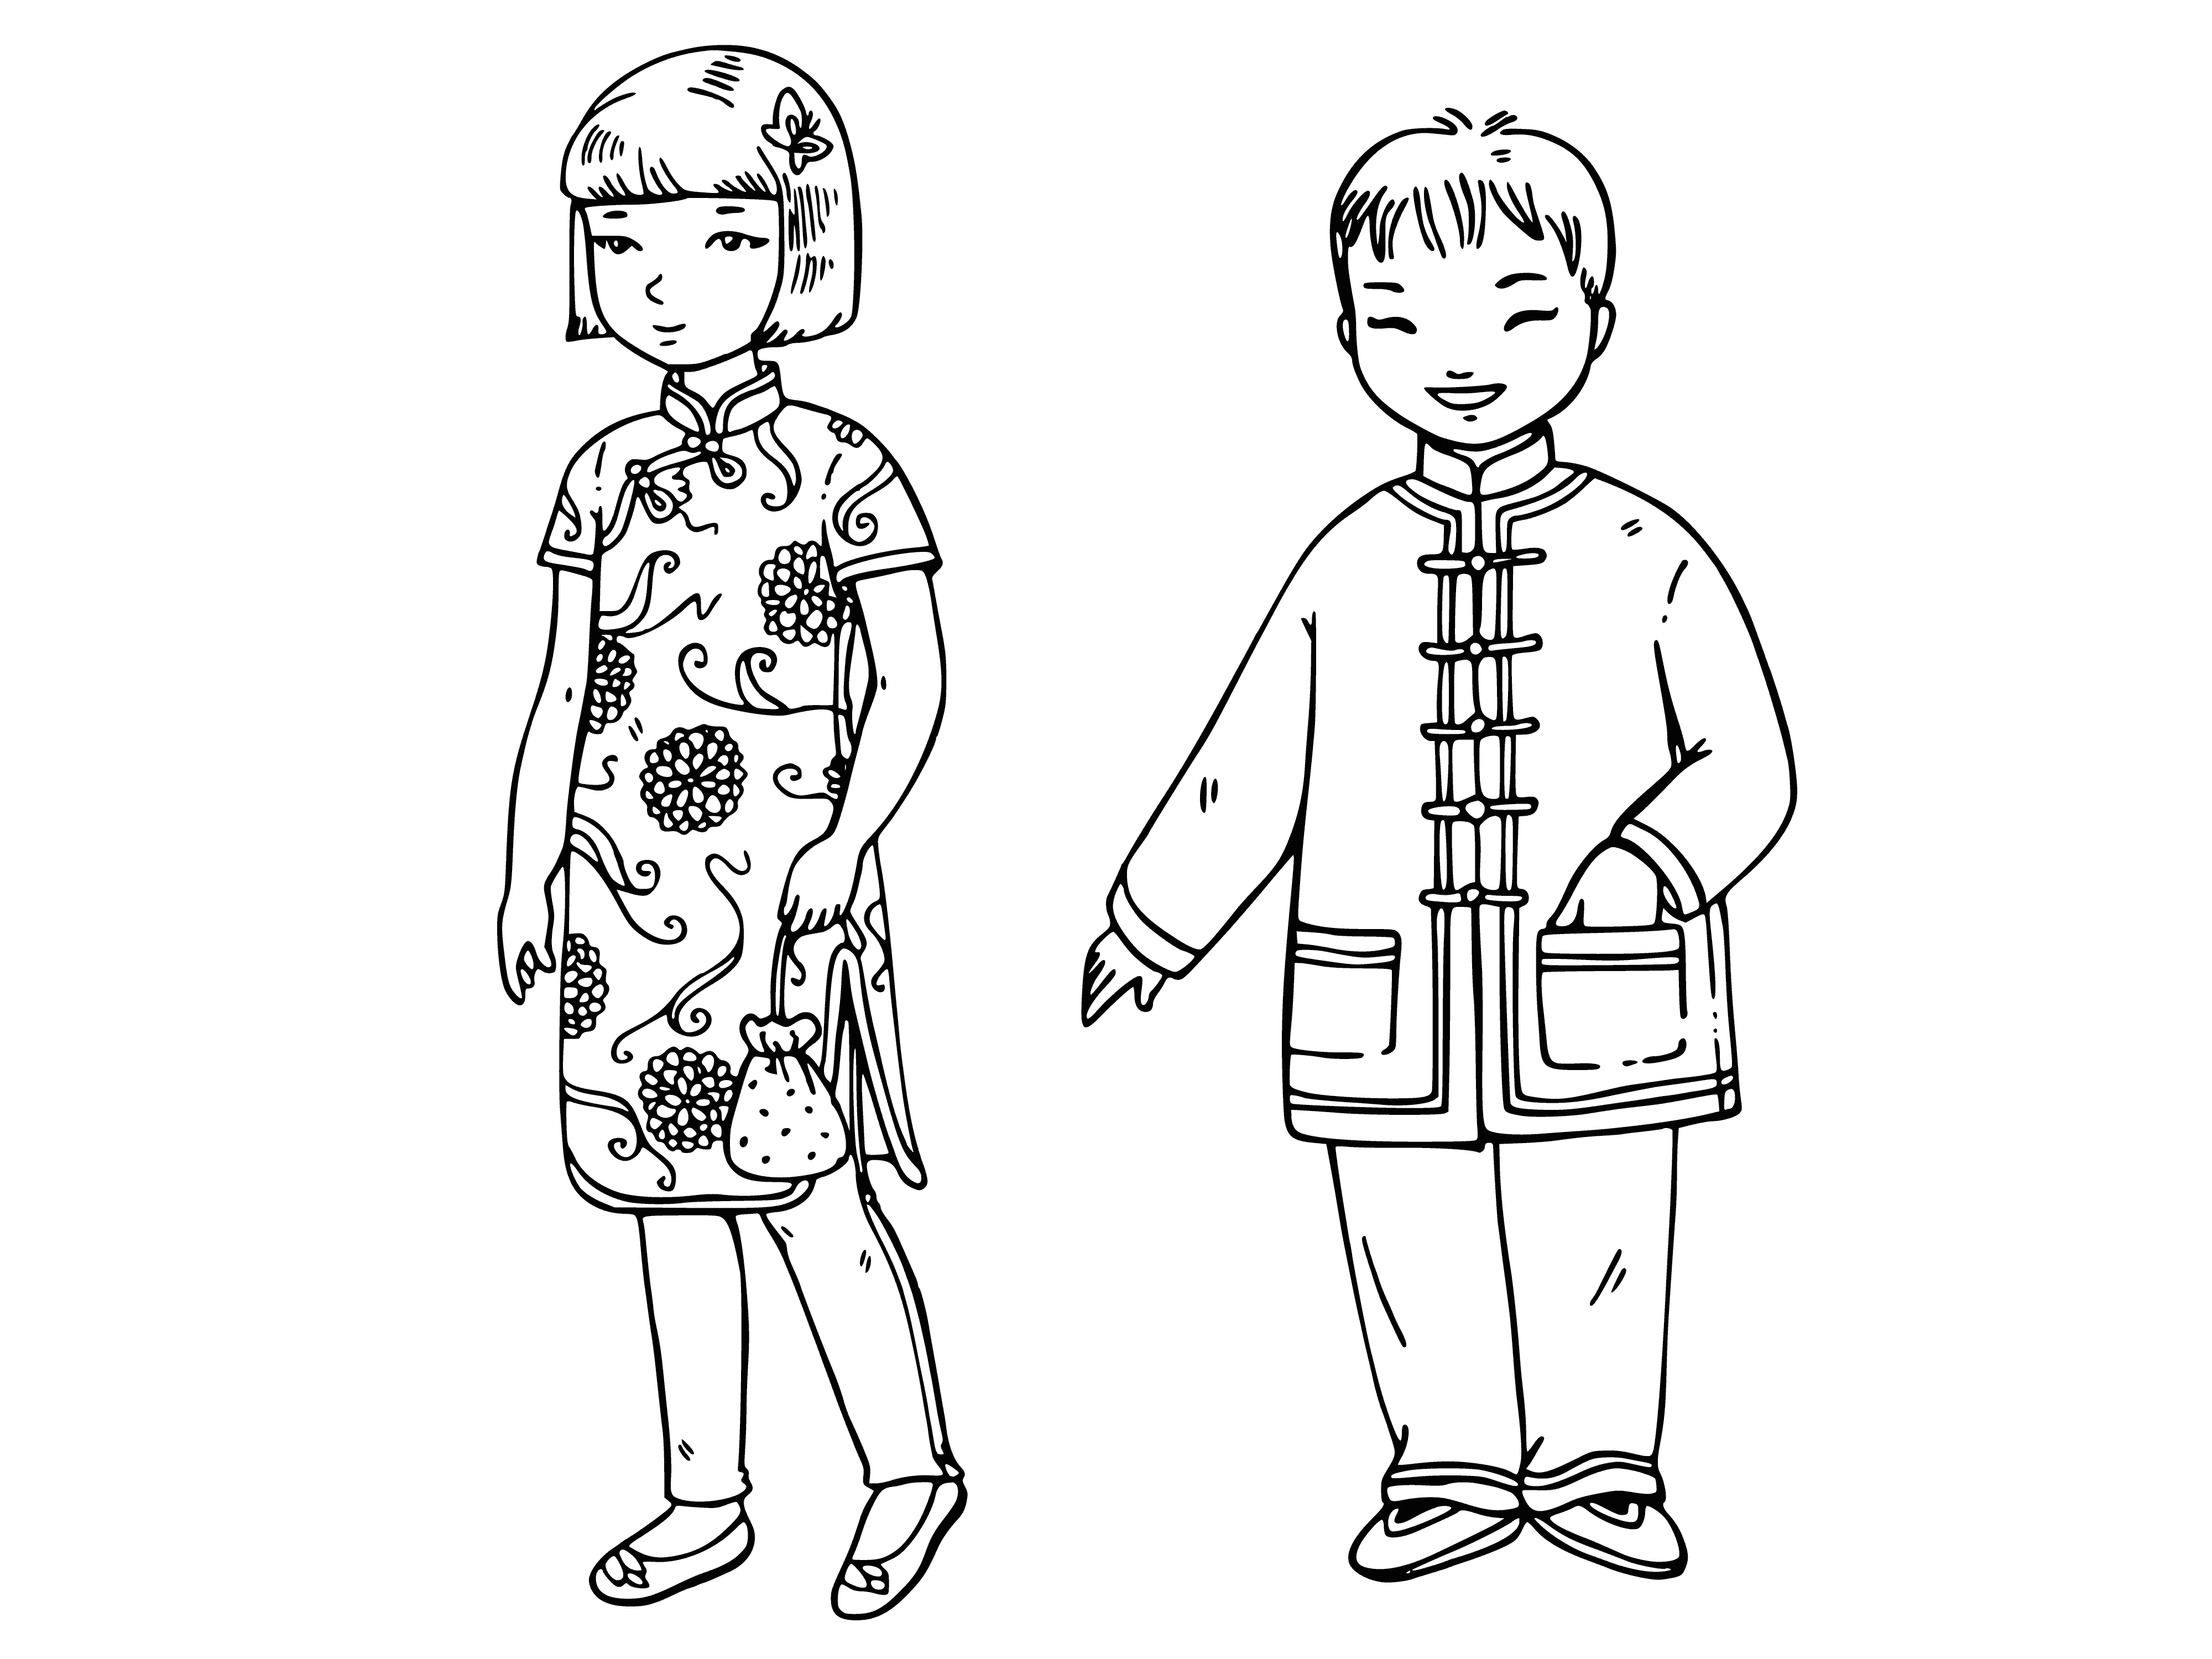 Chinese children coloring page